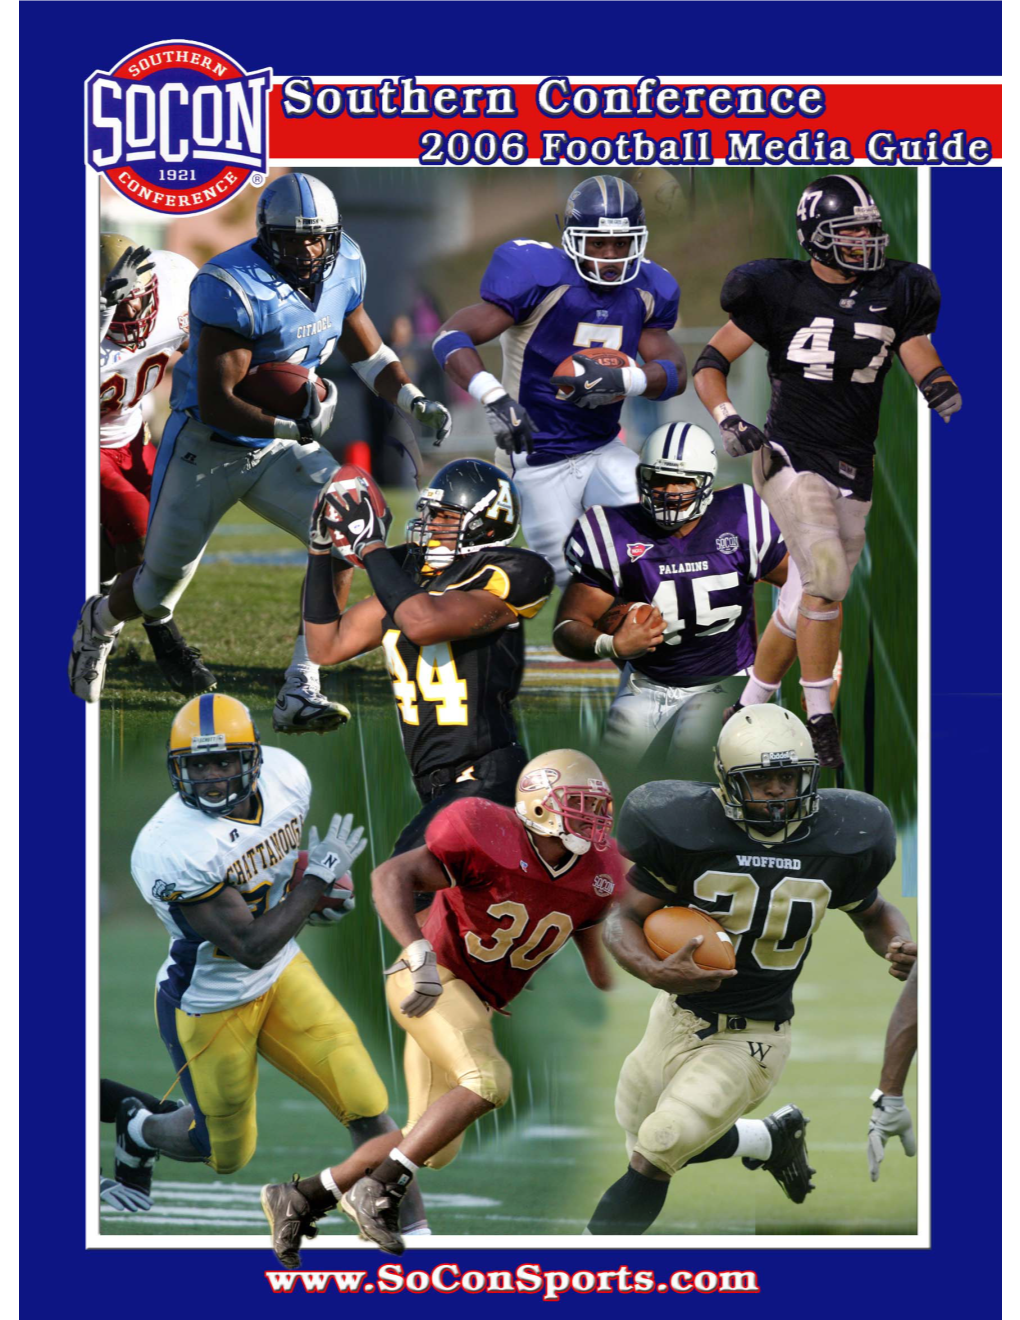 Southern Conference the Southern Conference FB Contact: Bryan Mcgowan Commissioner: John Iamarino 702 North Pine St